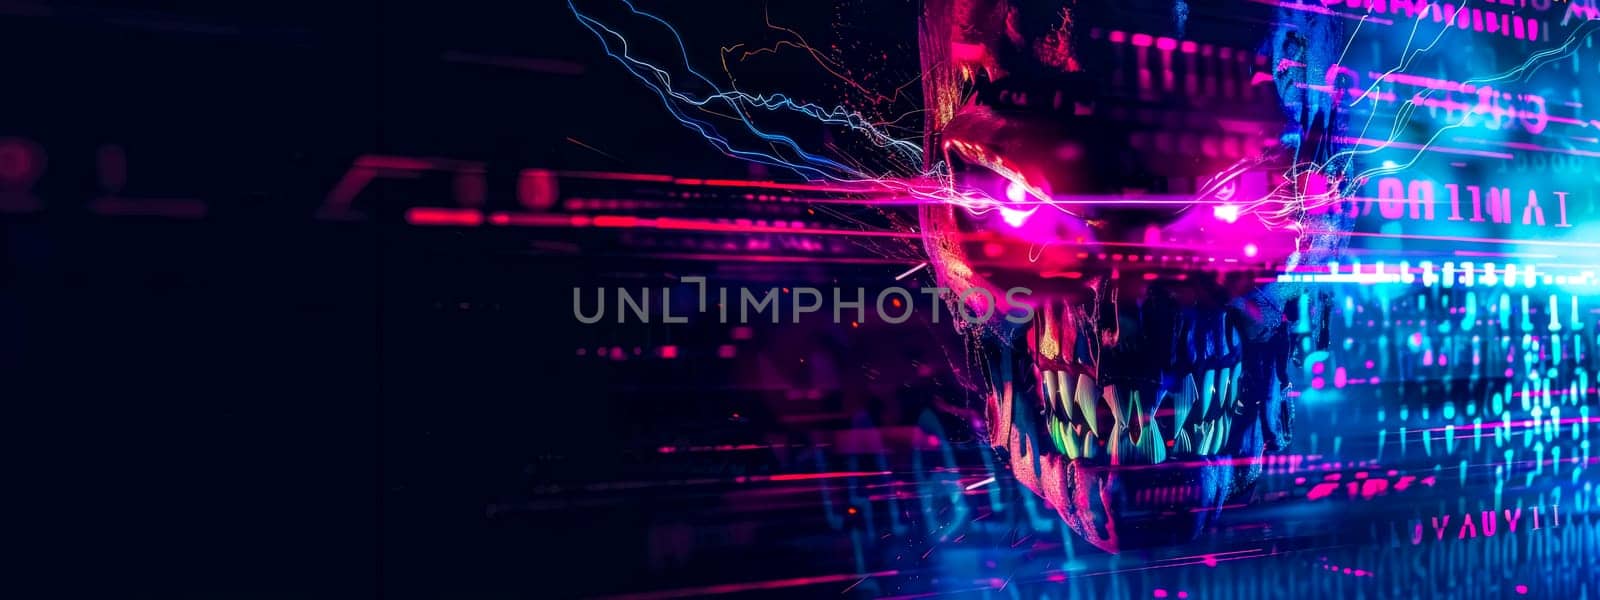 Abstract art of a human head silhouette with digital data streams and vibrant light effects